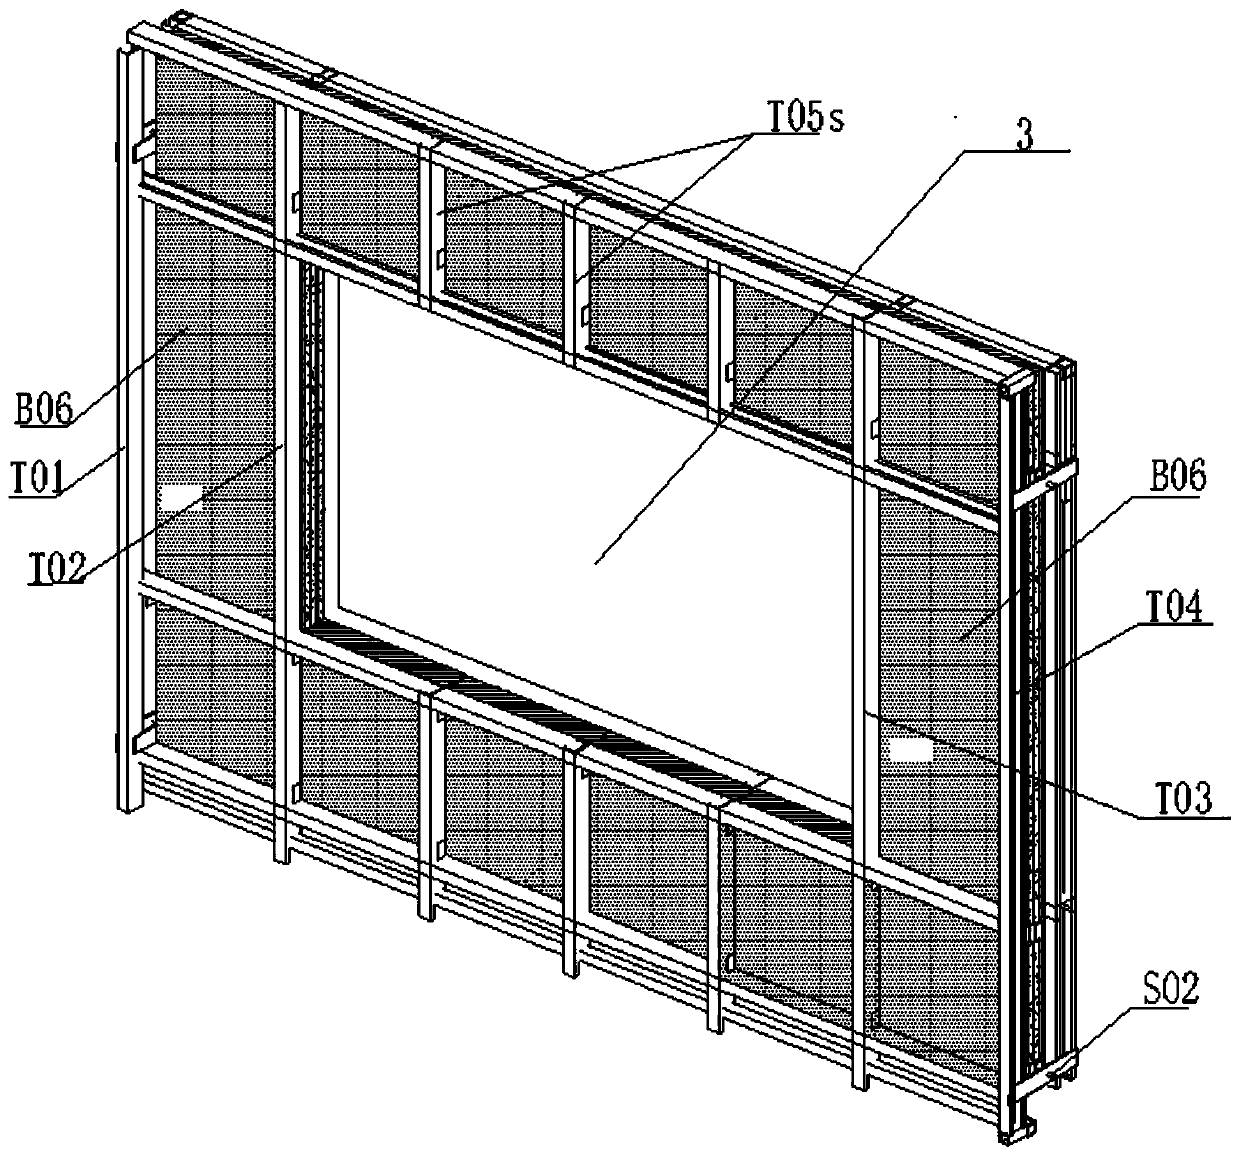 External enclosure system of fabricated steel structure house suitable for severe cold areas